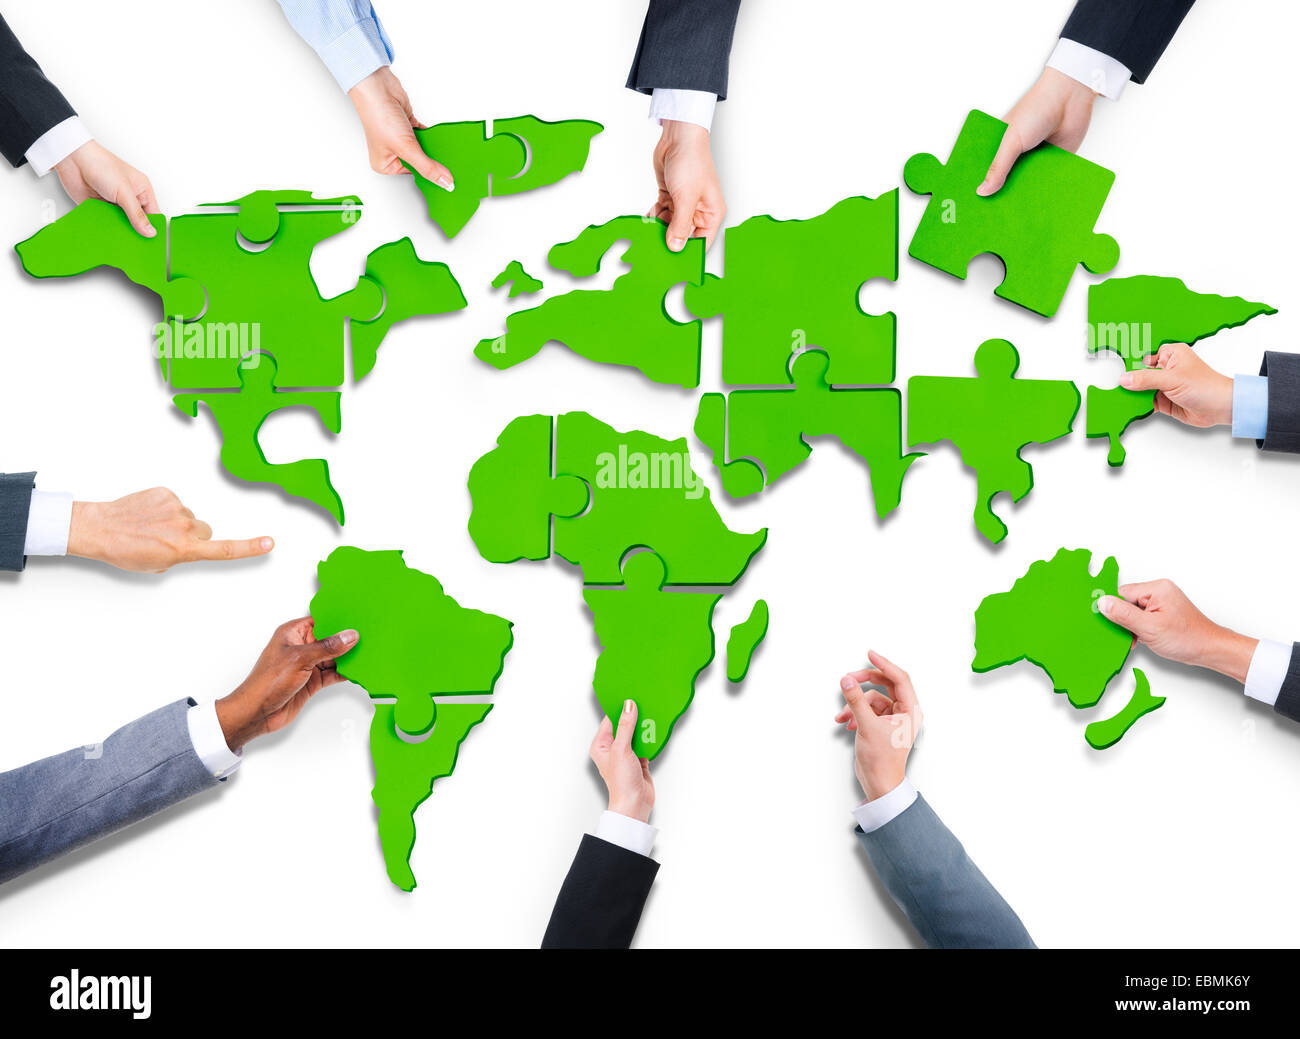 Group of Business People with Jigsaw Puzzle Forming in World Map Stock Photo